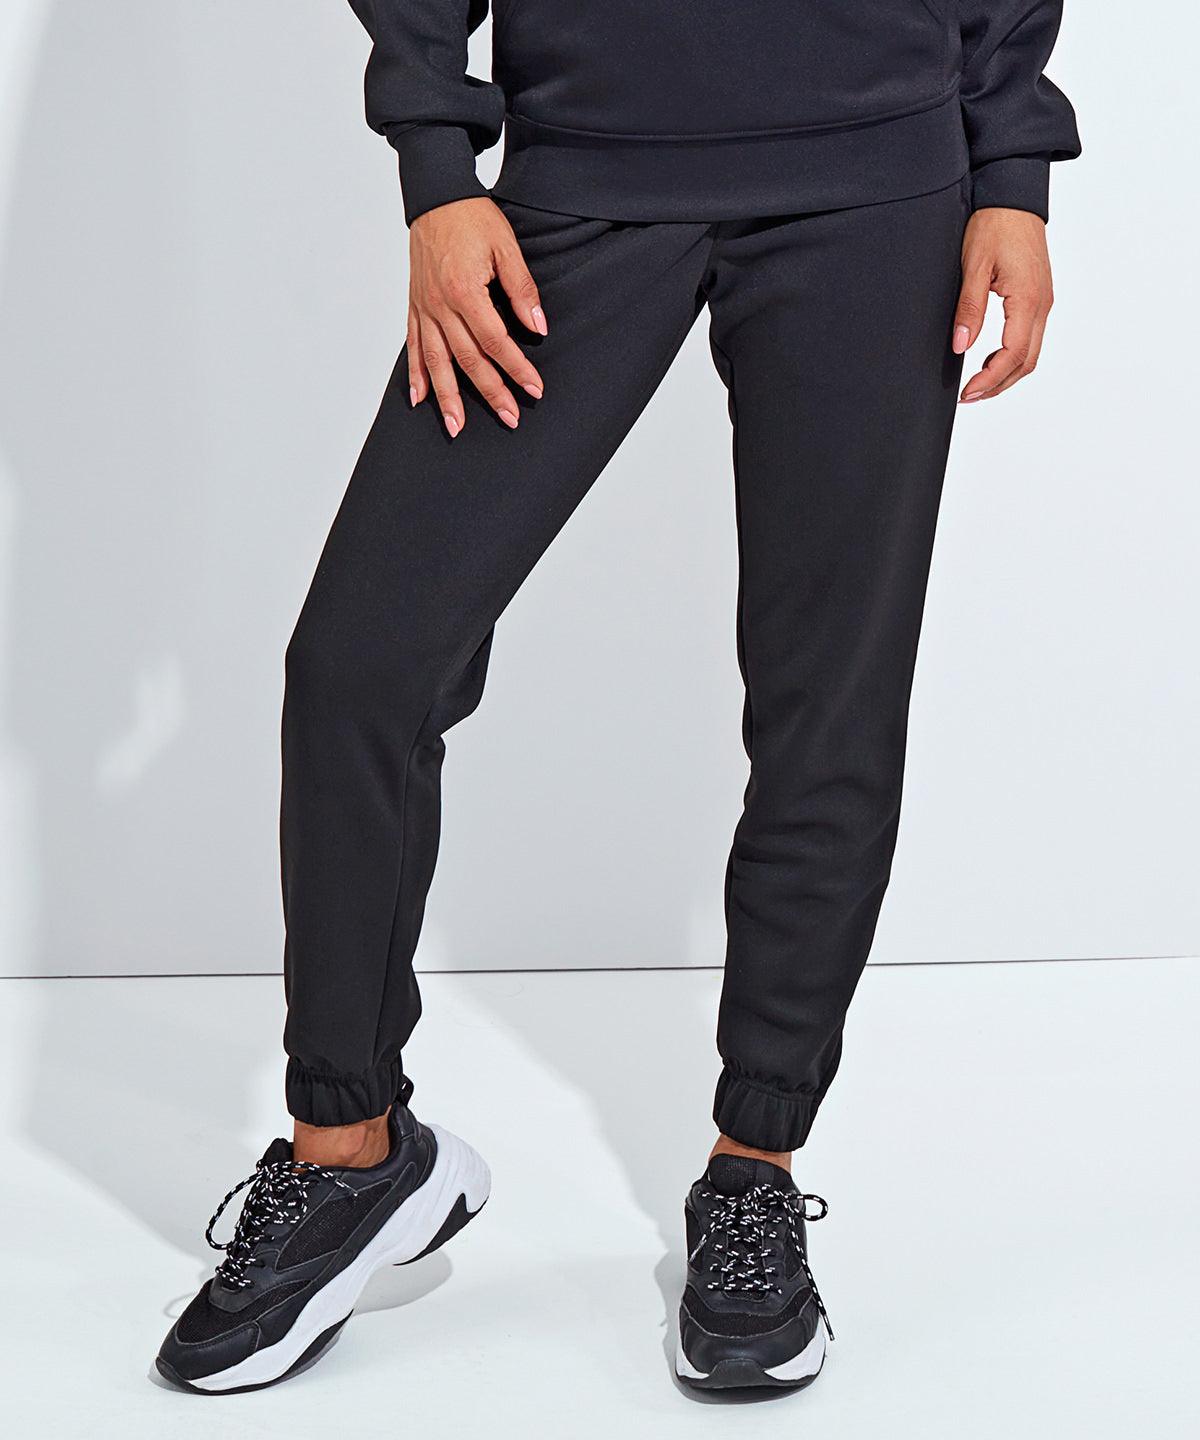 French Navy - Women's TriDri® Spun Dyed joggers Sweatpants TriDri® Activewear & Performance, Back to the Gym, Co-ords, Exclusives, New Styles For 2022, Organic & Conscious, Trousers & Shorts, Women's Fashion Schoolwear Centres